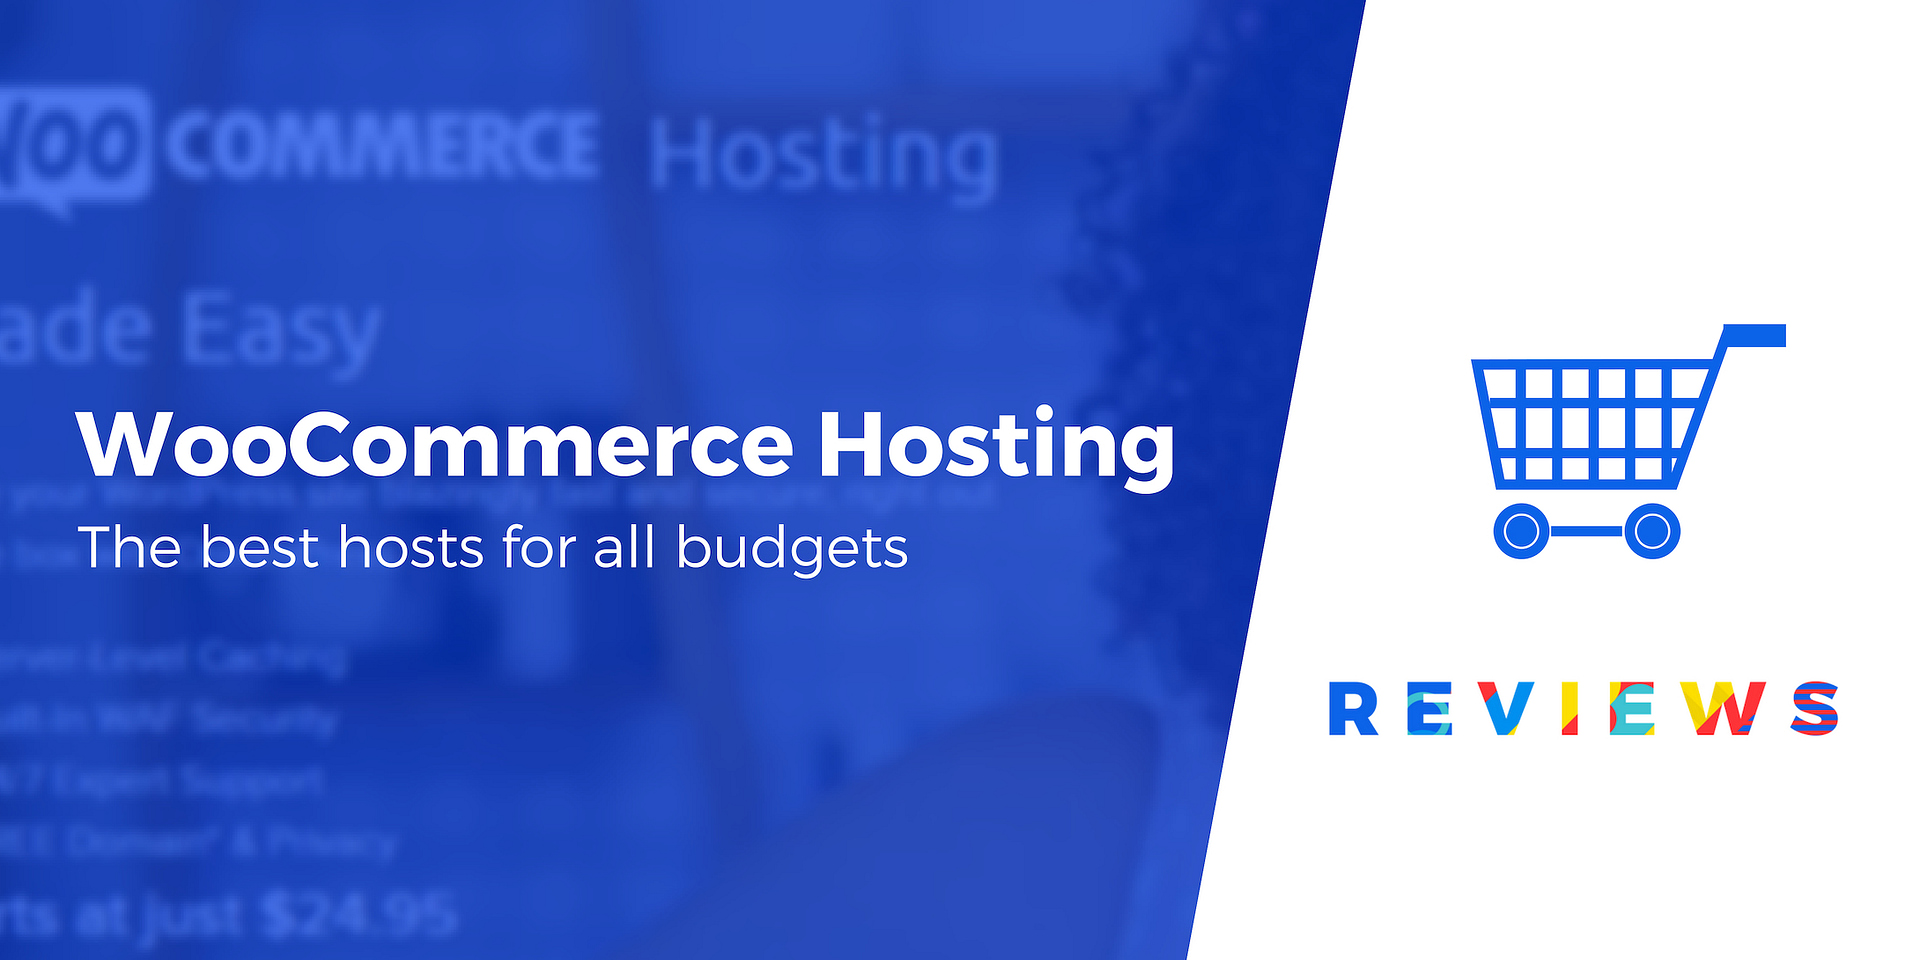 6 Best Woocommerce Hosting Compared 2020 For All Budgets Images, Photos, Reviews